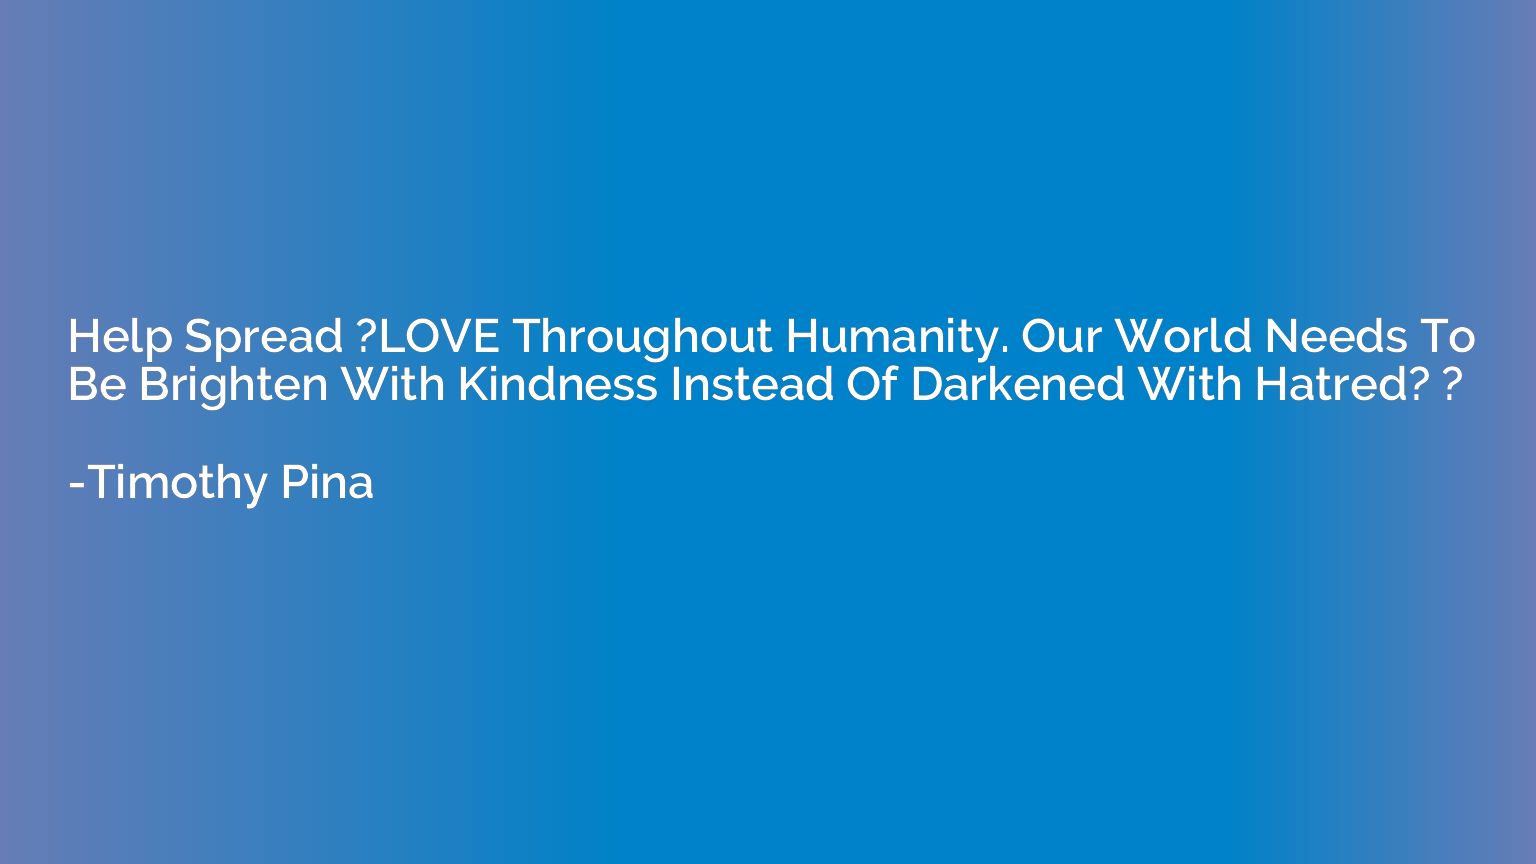 Help Spread ?LOVE Throughout Humanity. Our World Needs To Be